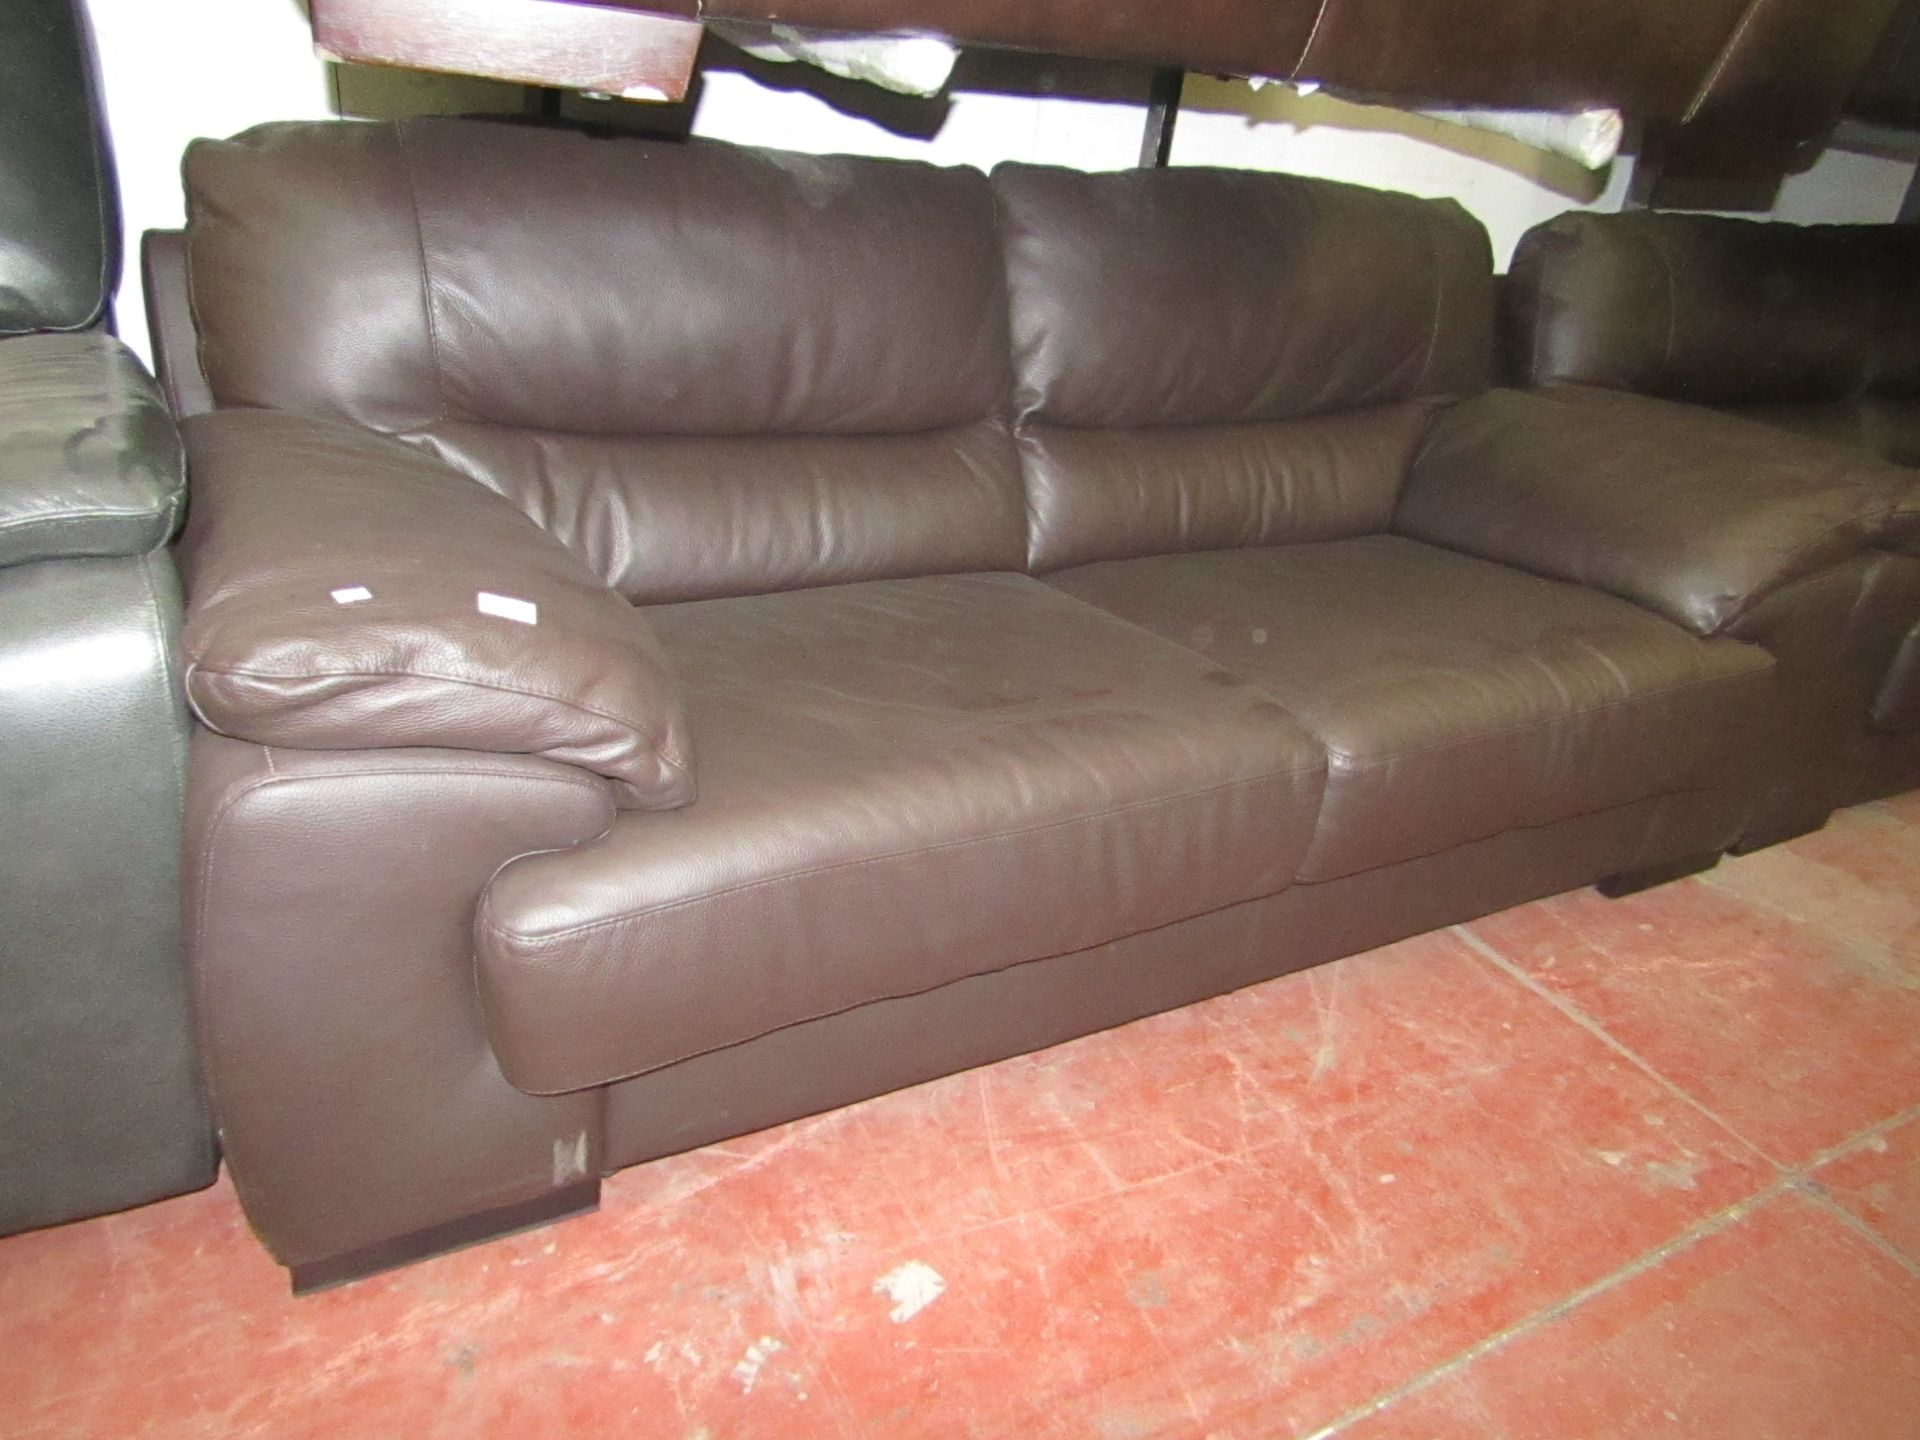 Costco Brown leather 3 seater 2 cushion sofa, no major visible damage